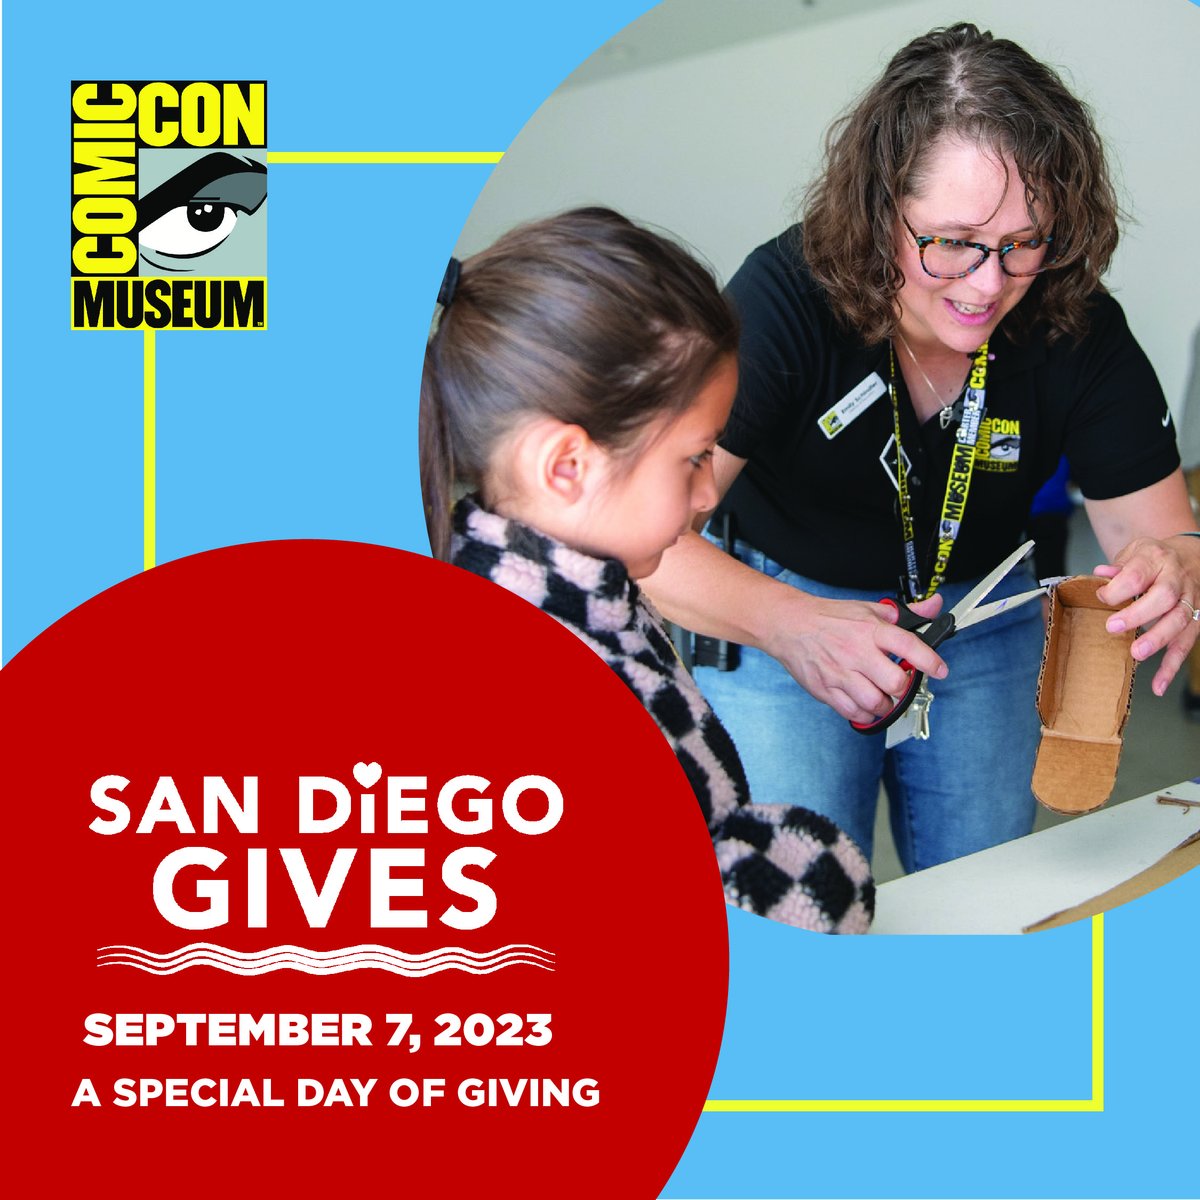 San Diego Assemble! 🦸 Support Comic-Con Museum's mission to raise $20k during @SanDiegoGives. 🏆 Your donation will help fund our incredible education center. With your support, we can craft even more unforgettable memories. #GiveLocal easily & securely: bit.ly/CCMSDGives23.